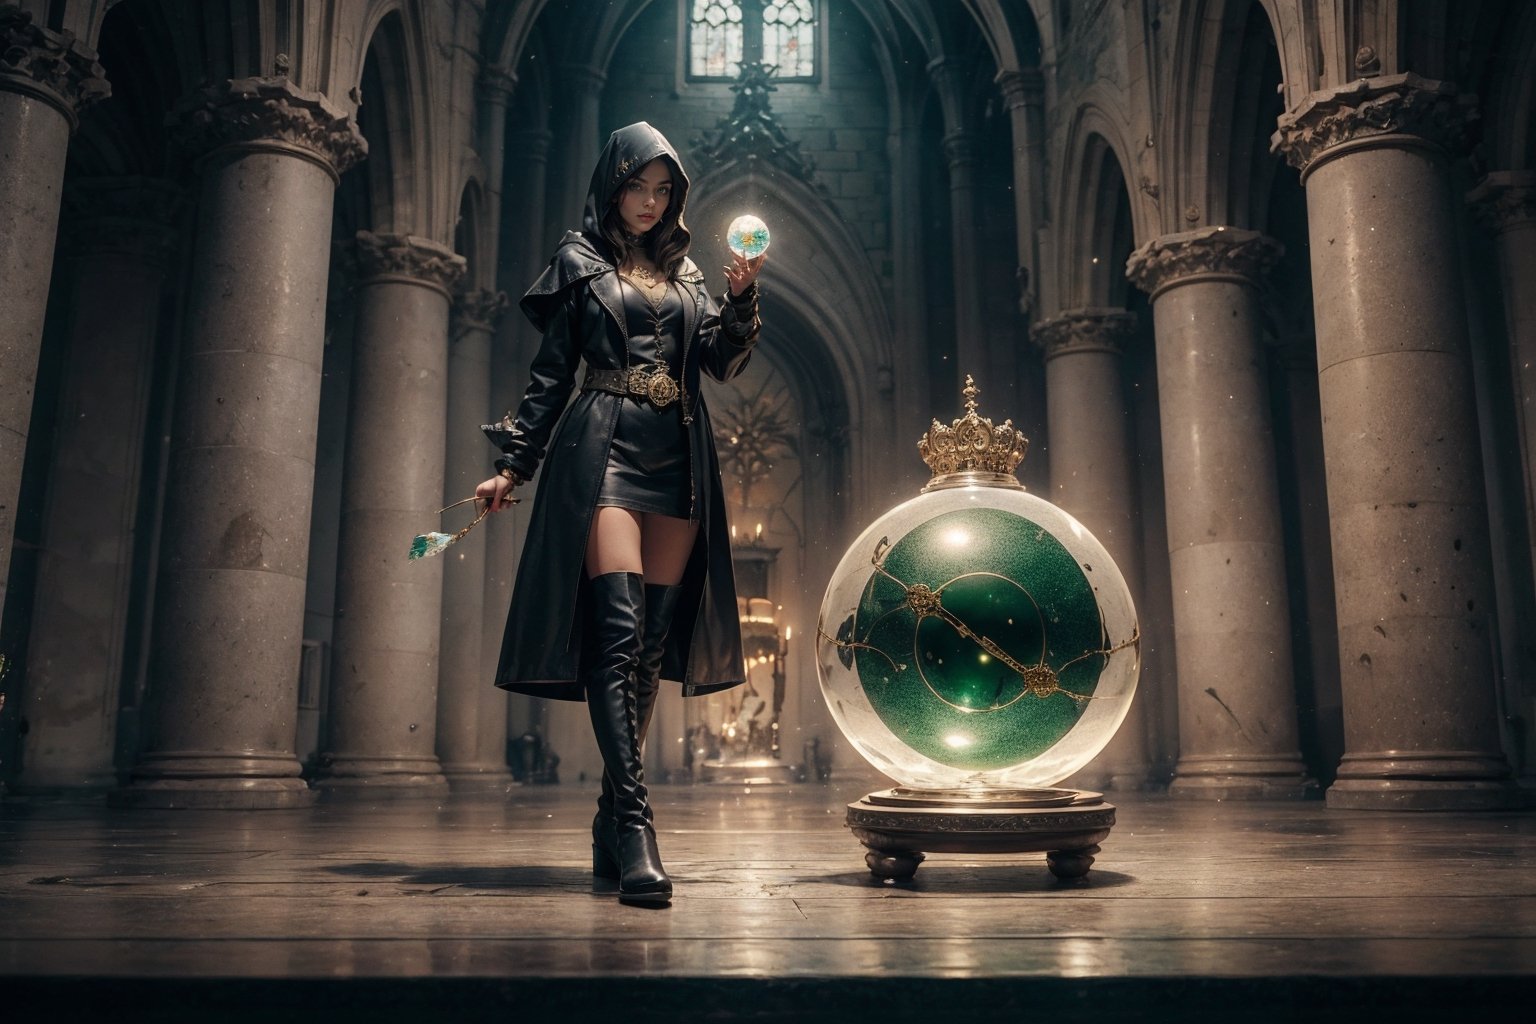 (CharacterSheet:1), sole_female, "a 23 year old sorceress, black hair, green eyes, black leather hood, black leather long boots, holding a crystal ball, medeval wizards castle.",